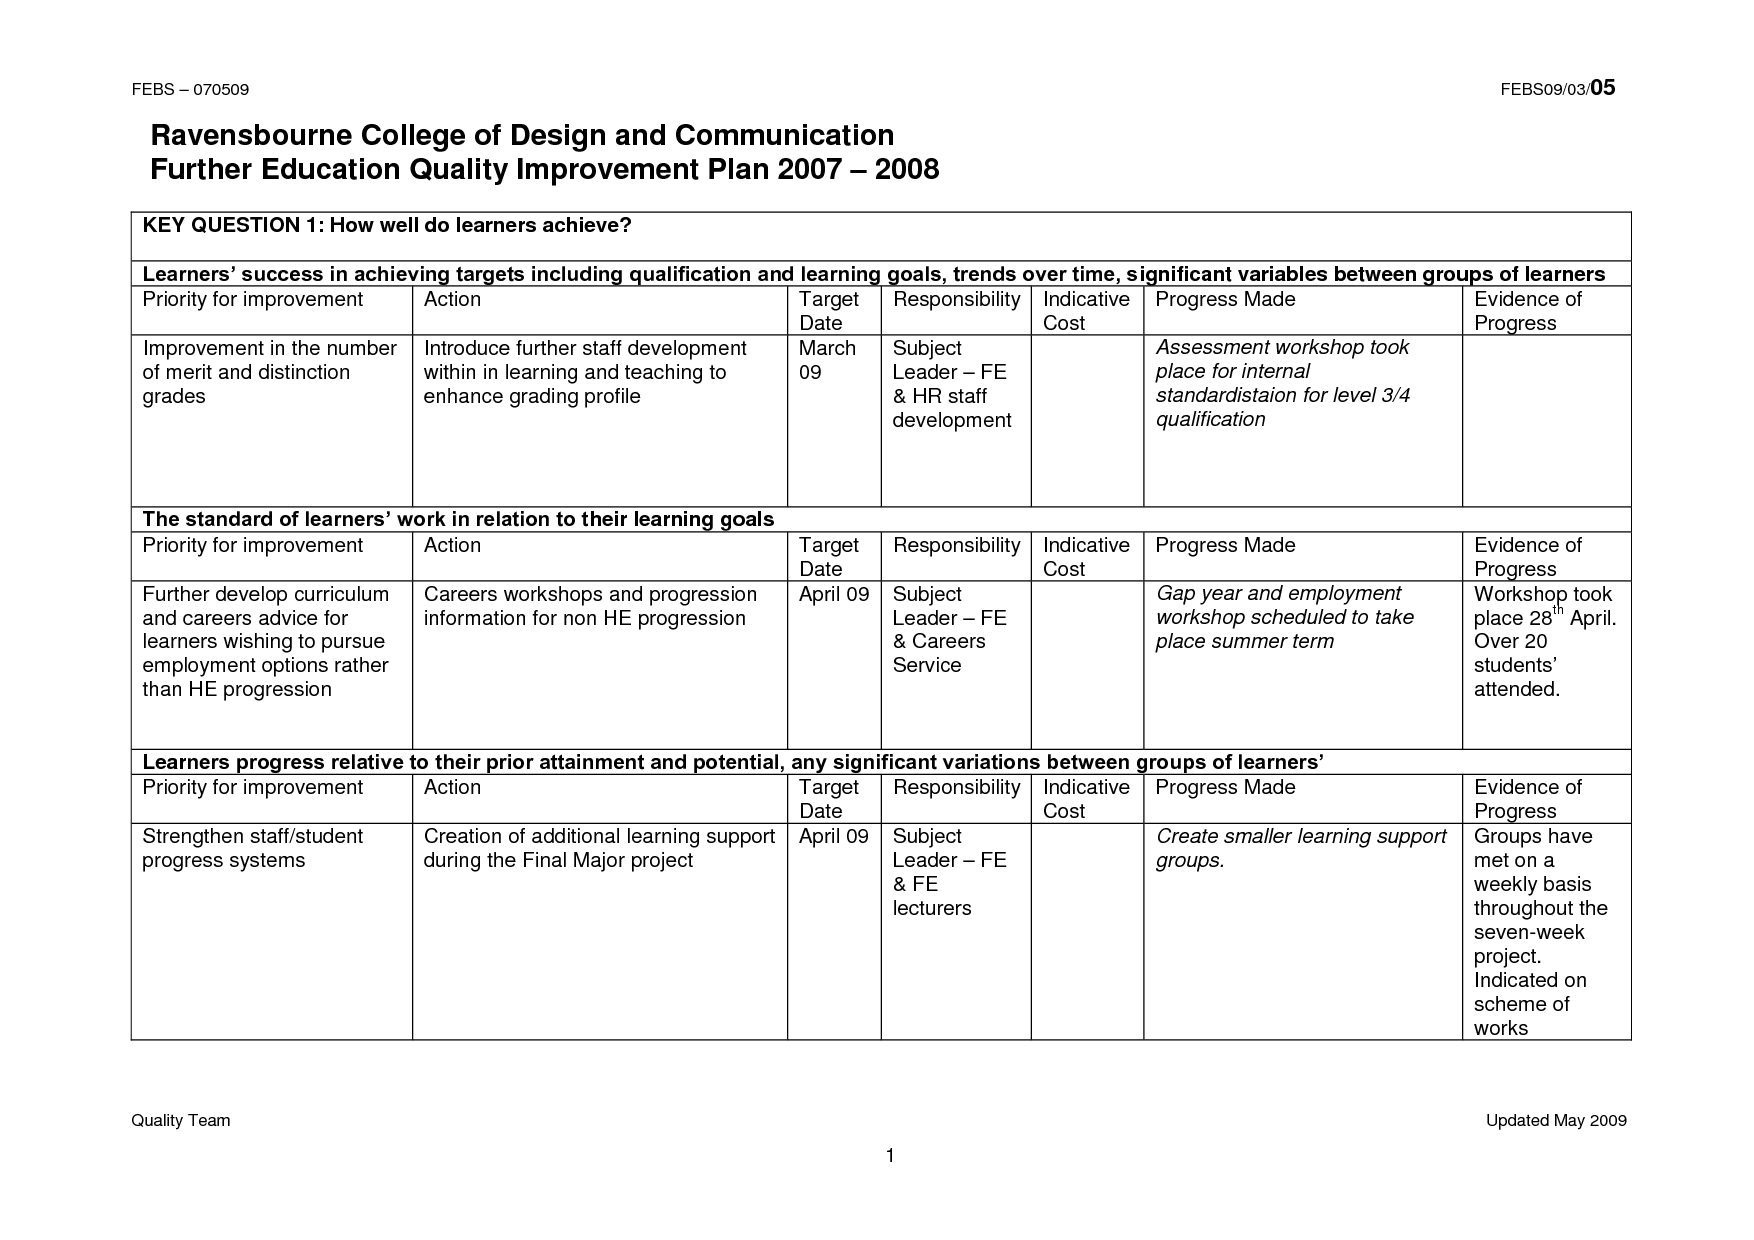 Quality Improvement Project Template